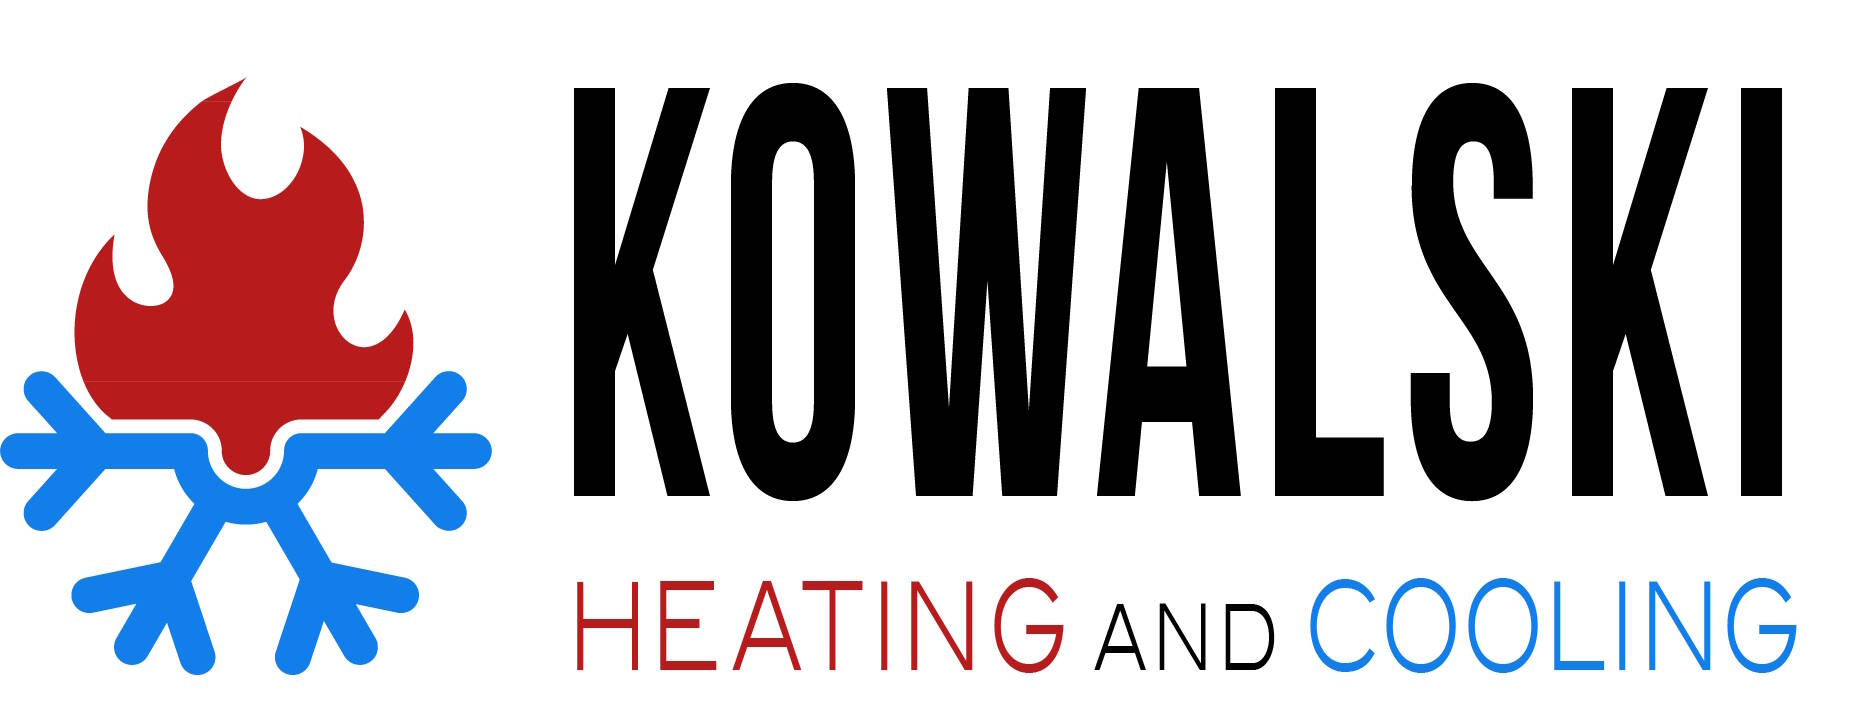 Kowalski Heating and Cooling